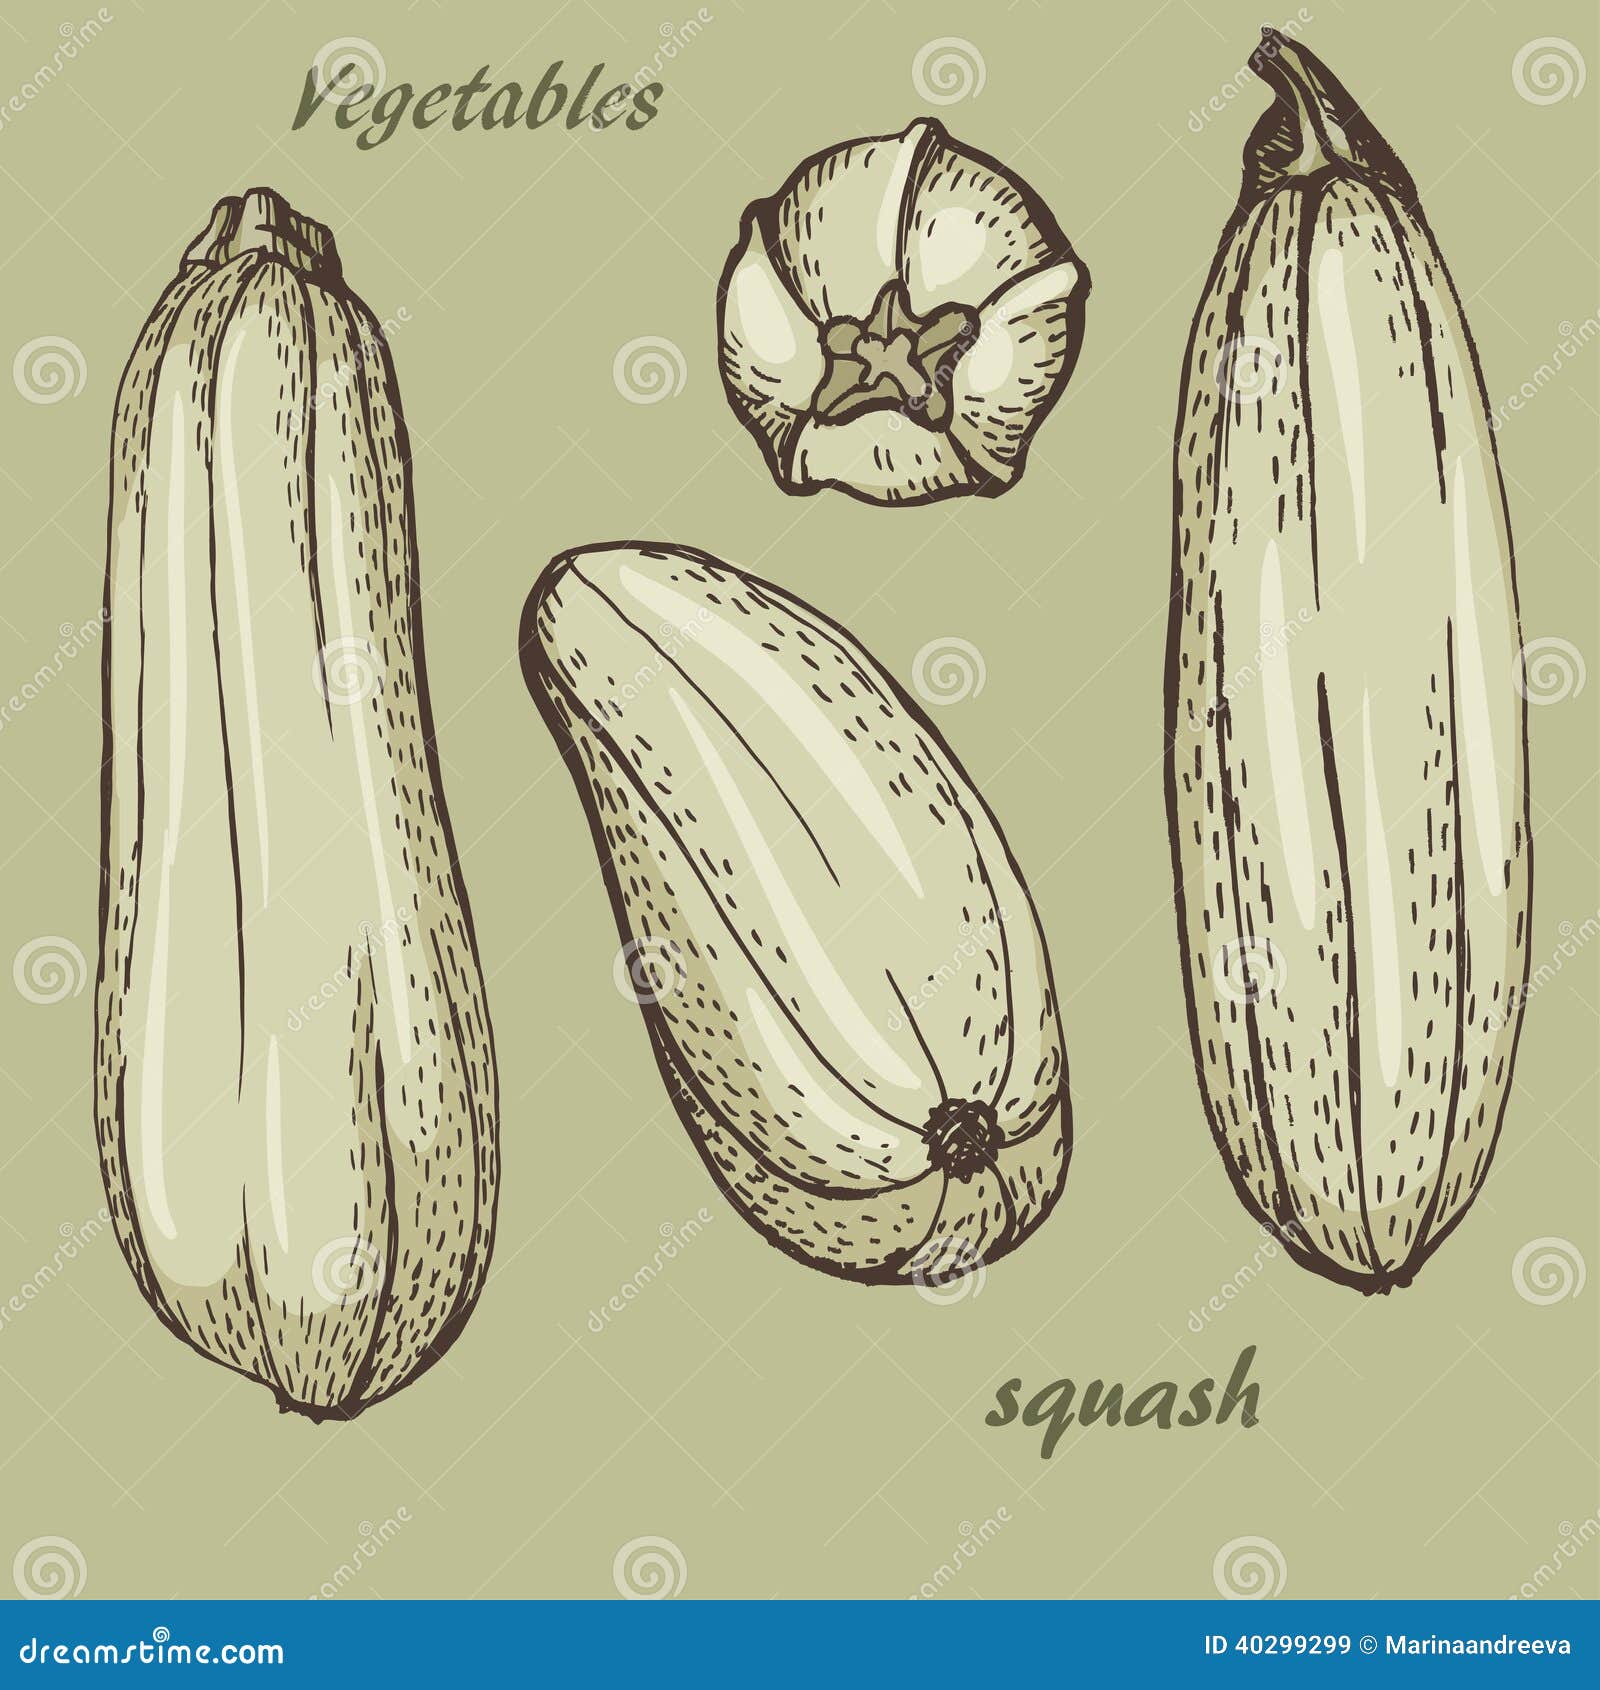 Squash colour stock vector. Illustration of texture, painted - 40299299